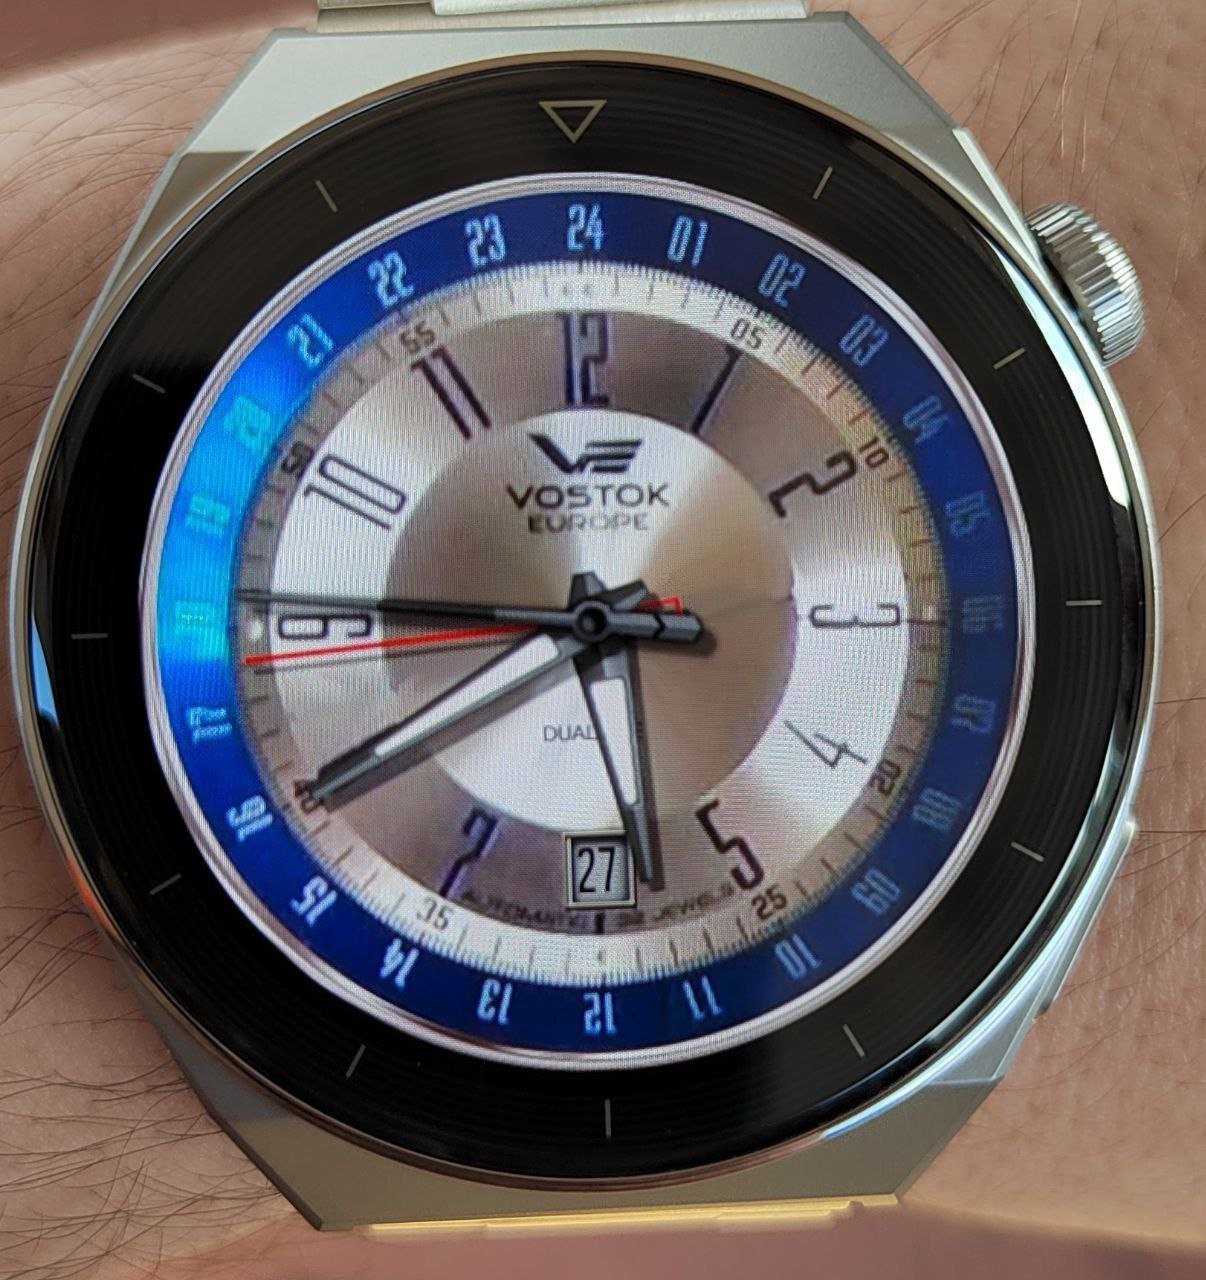 Vostok dual time HQ realistic watch face theme